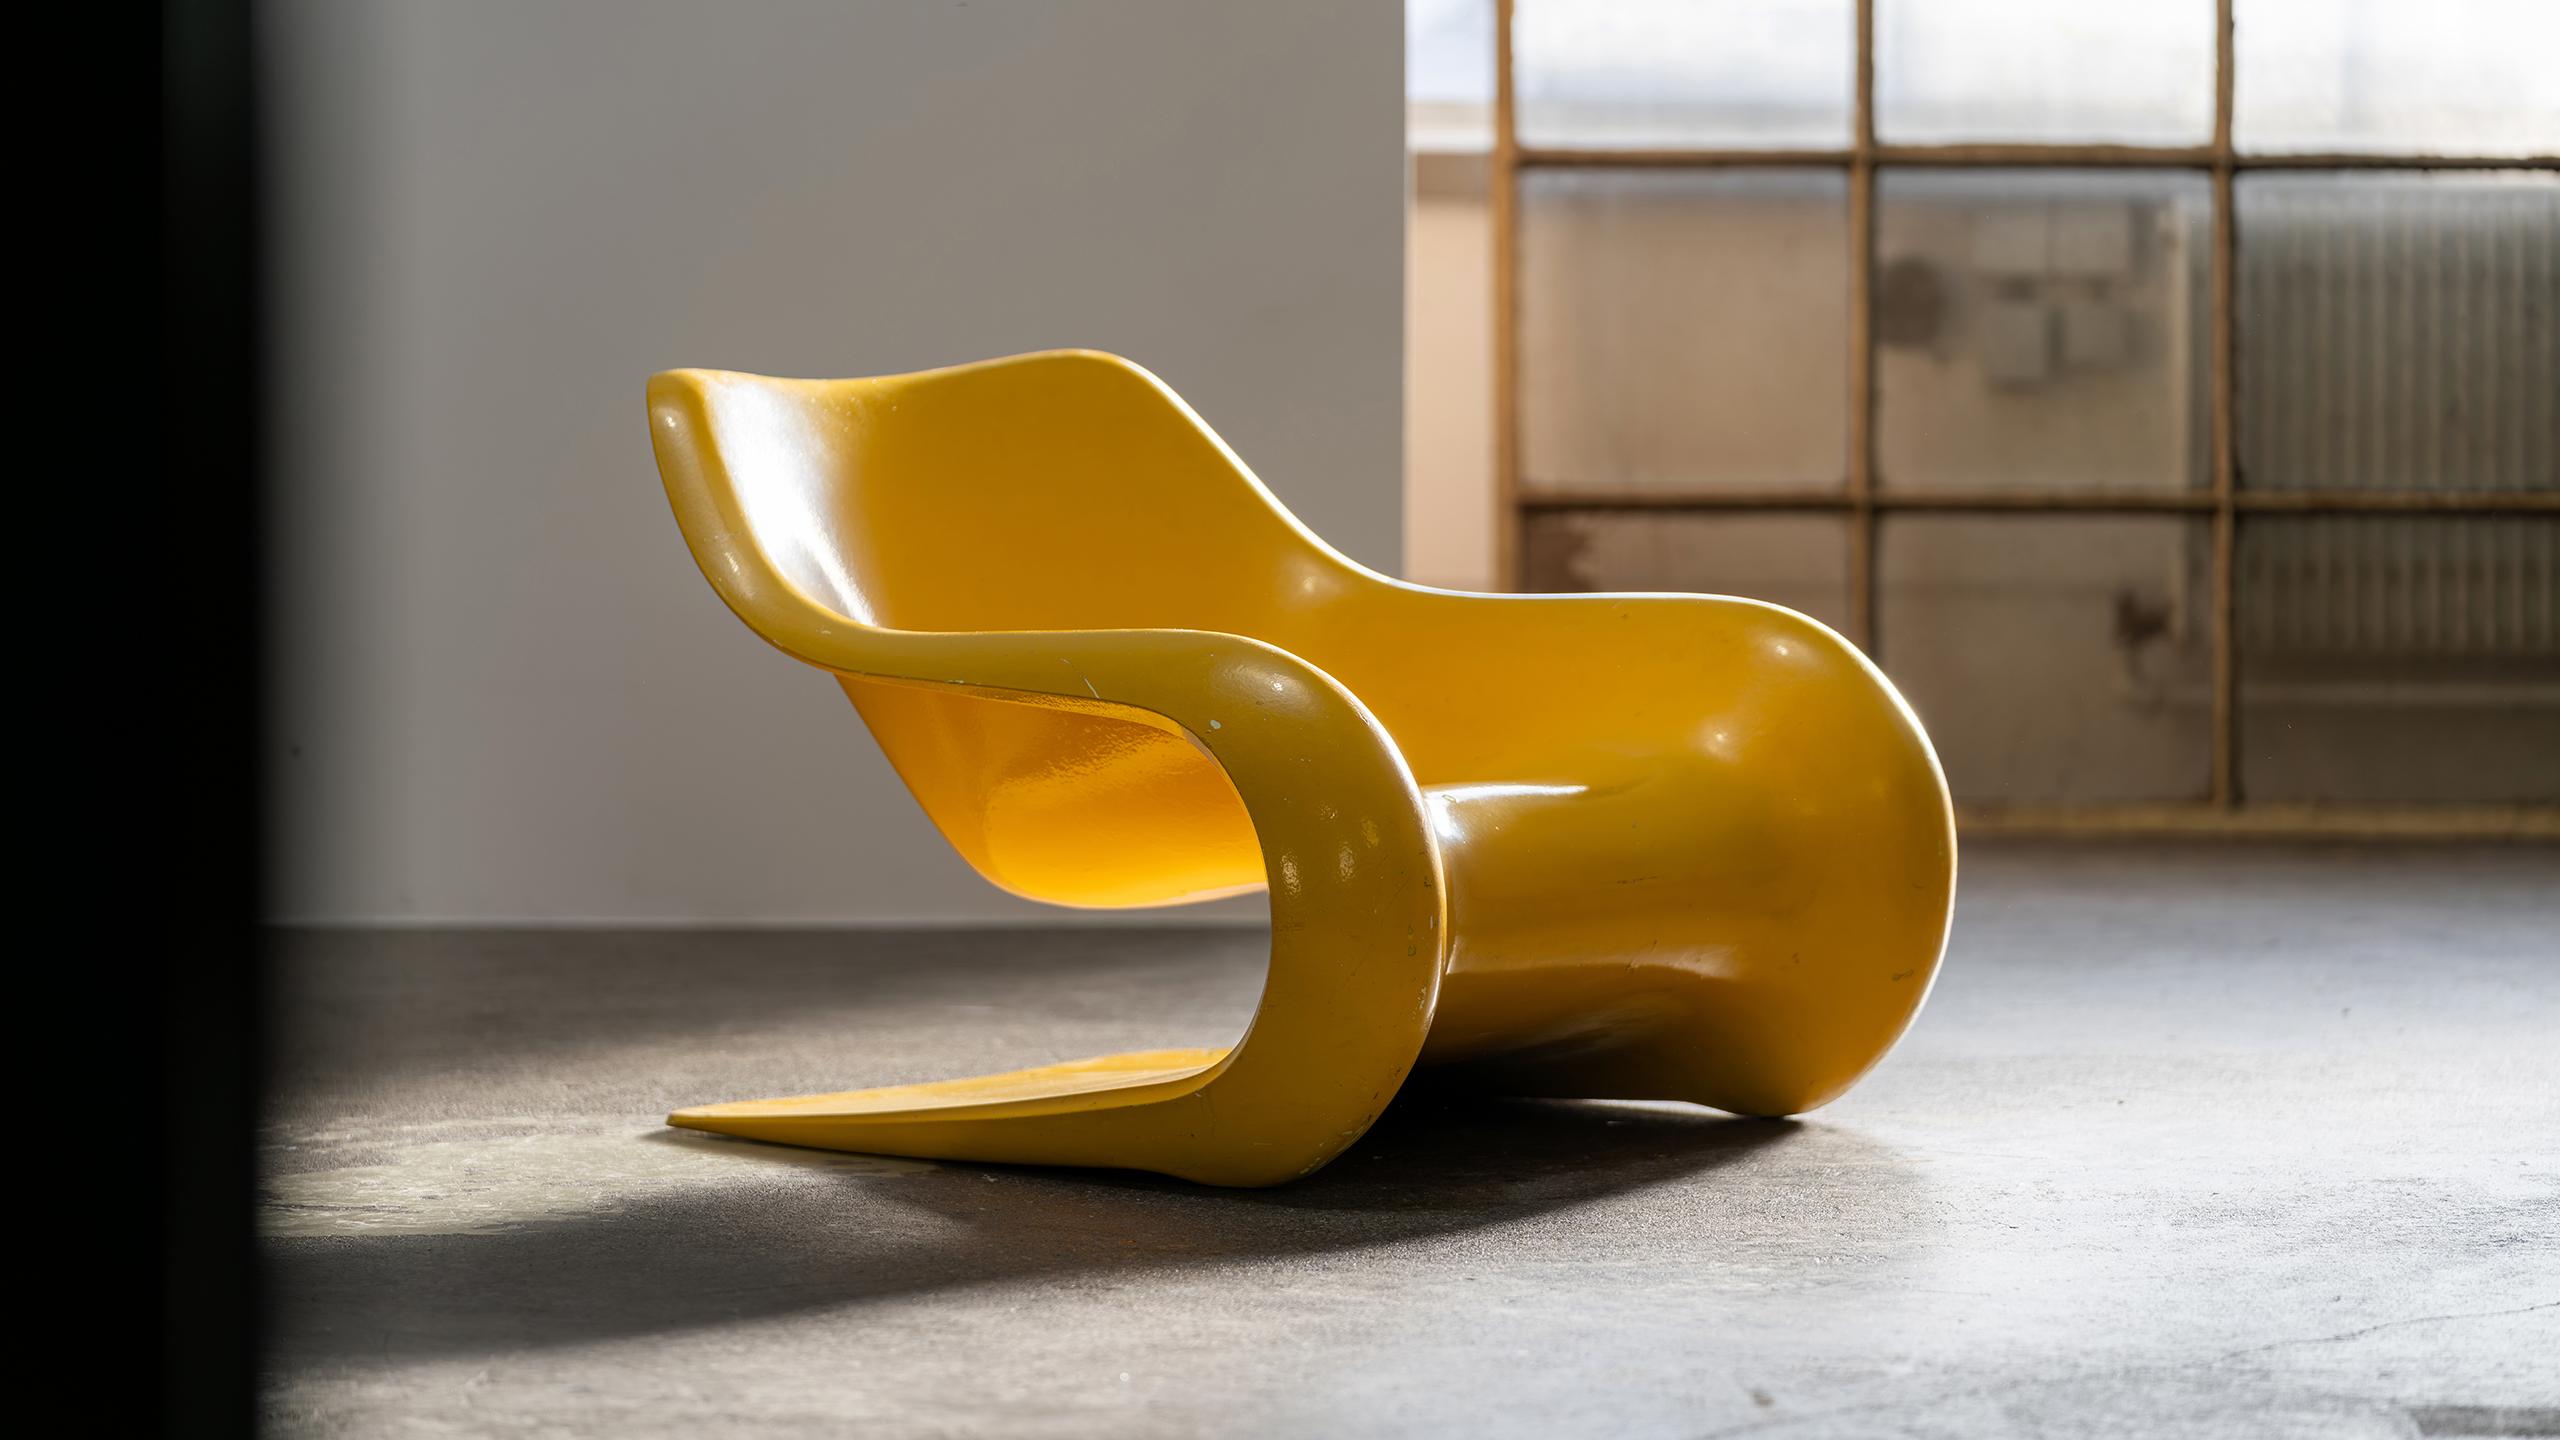 Targa Chair by Klaus Uredat, 19709 for Horn Collection, Germany - Organic Design 8